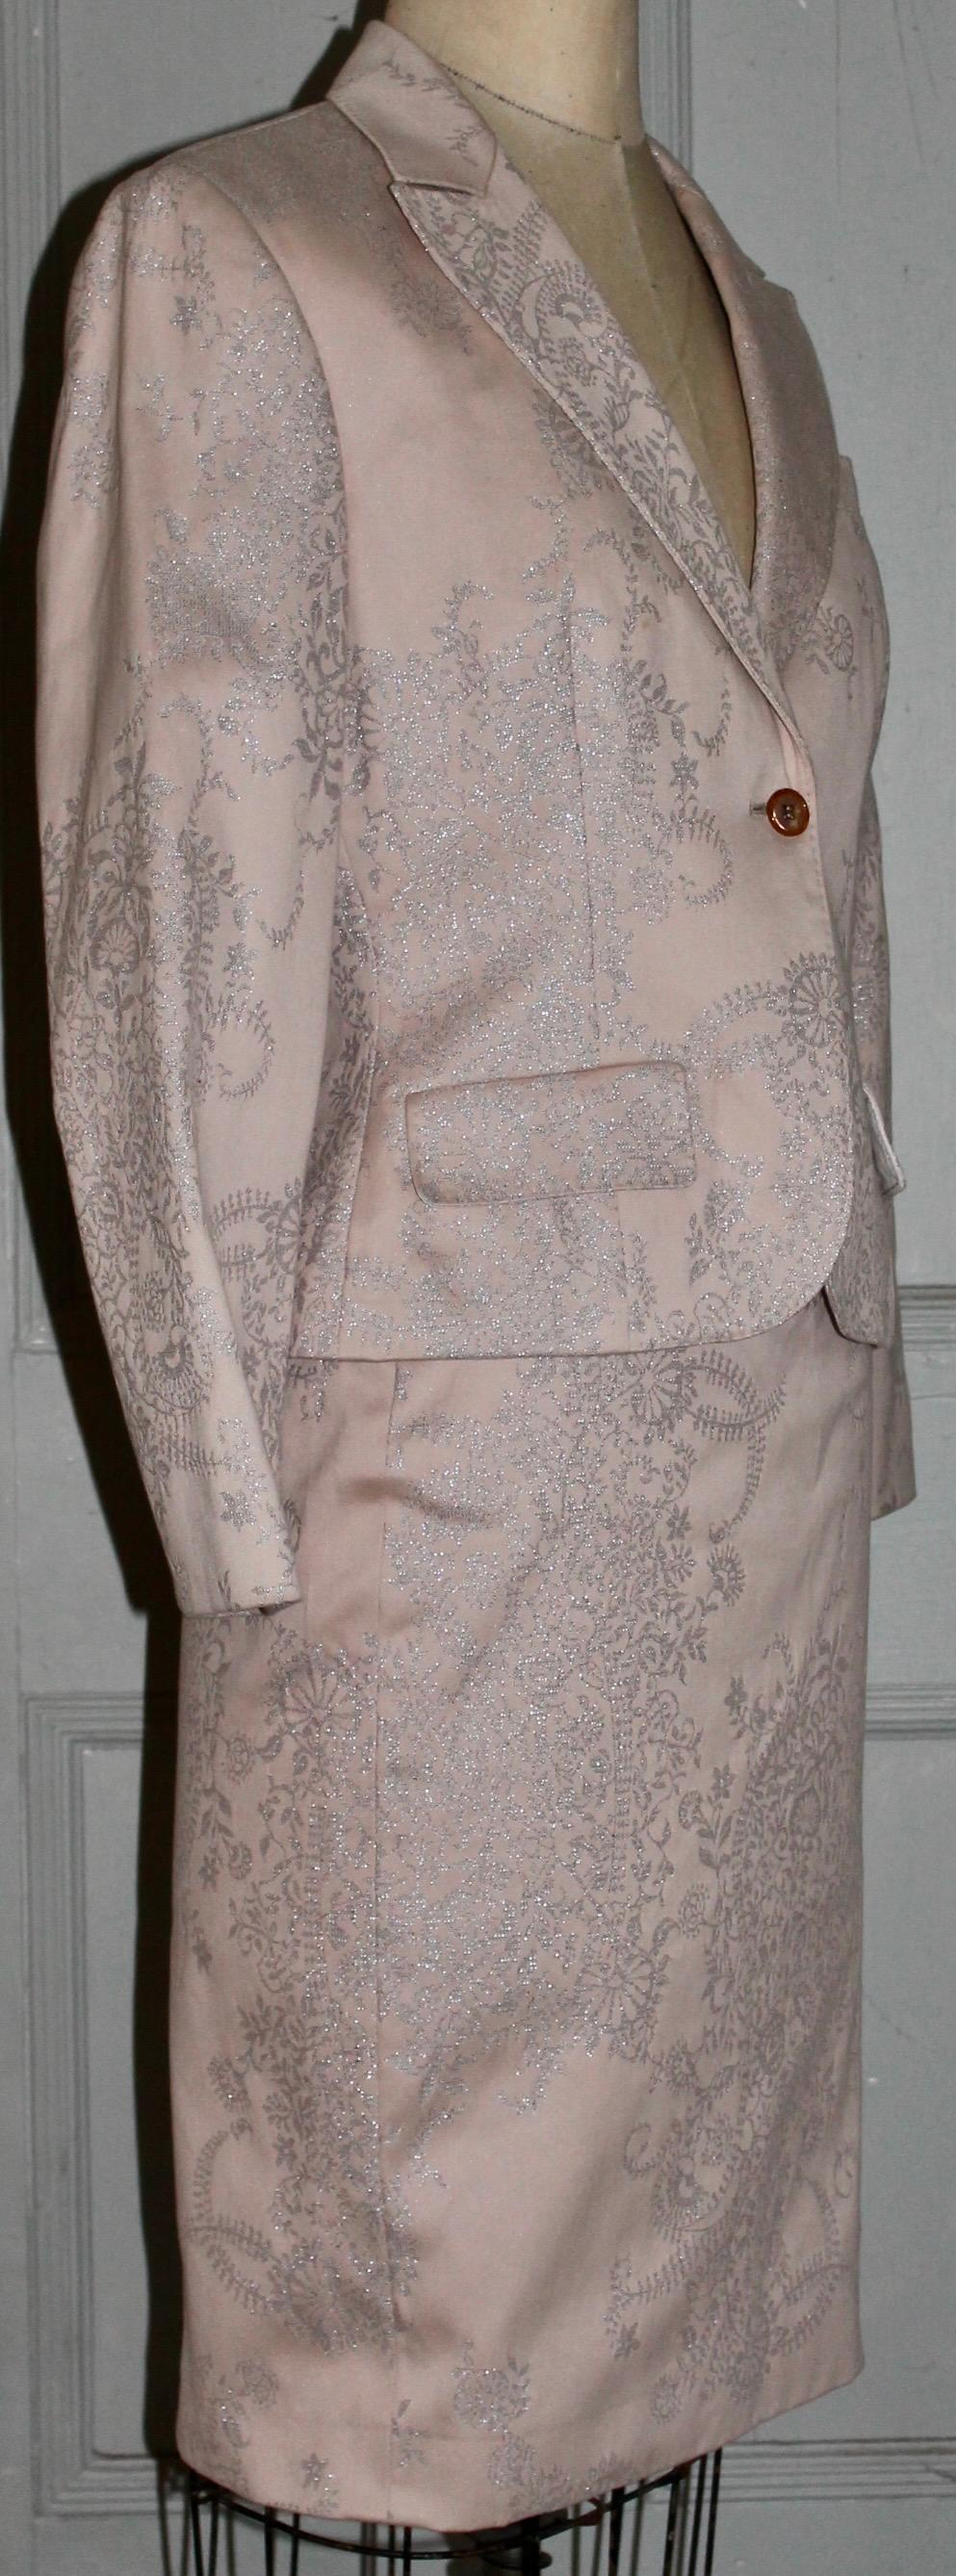 Alexander McQueen circa 2000 Dusty Pale Rose Suit In Good Condition For Sale In Sharon, CT